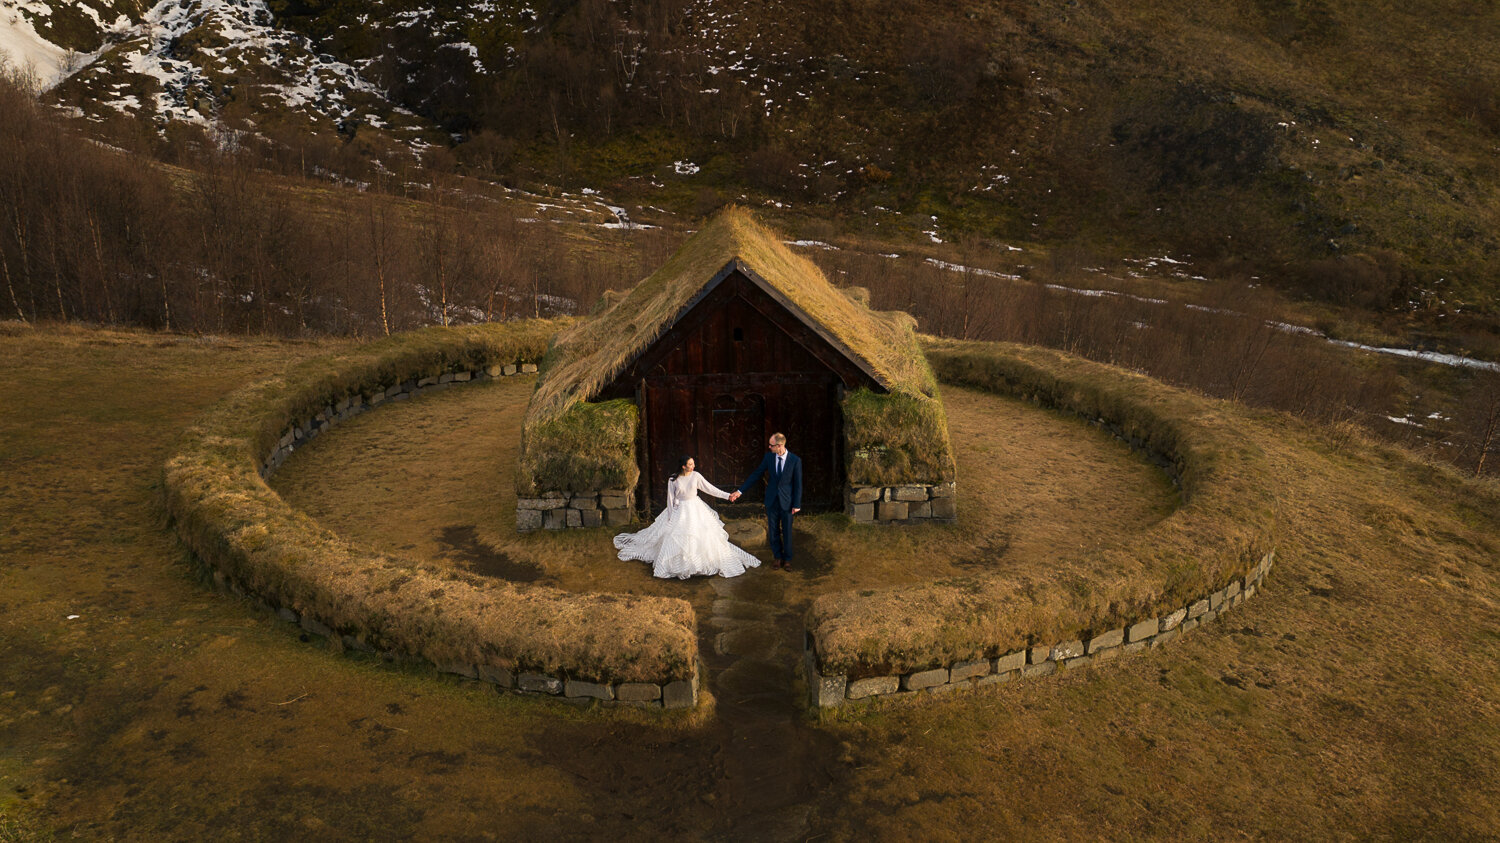 Iceland wedding photographer. Drone wedding photography next to a traditional Icelandic sod grass roof house.